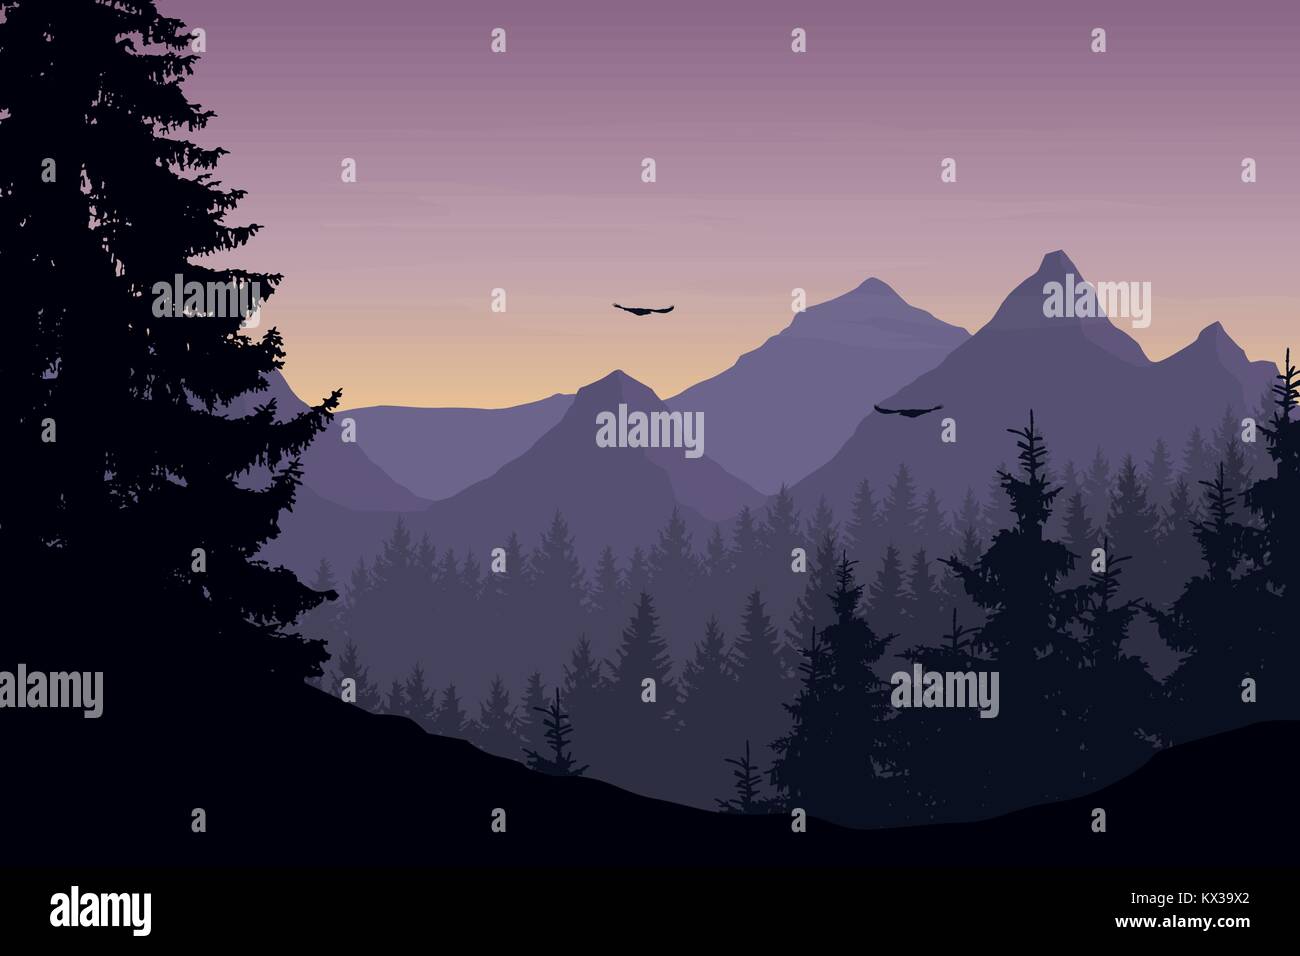 Vector illustration of mountain landscape with forest and flying birds under cloudy sky with dawn Stock Vector